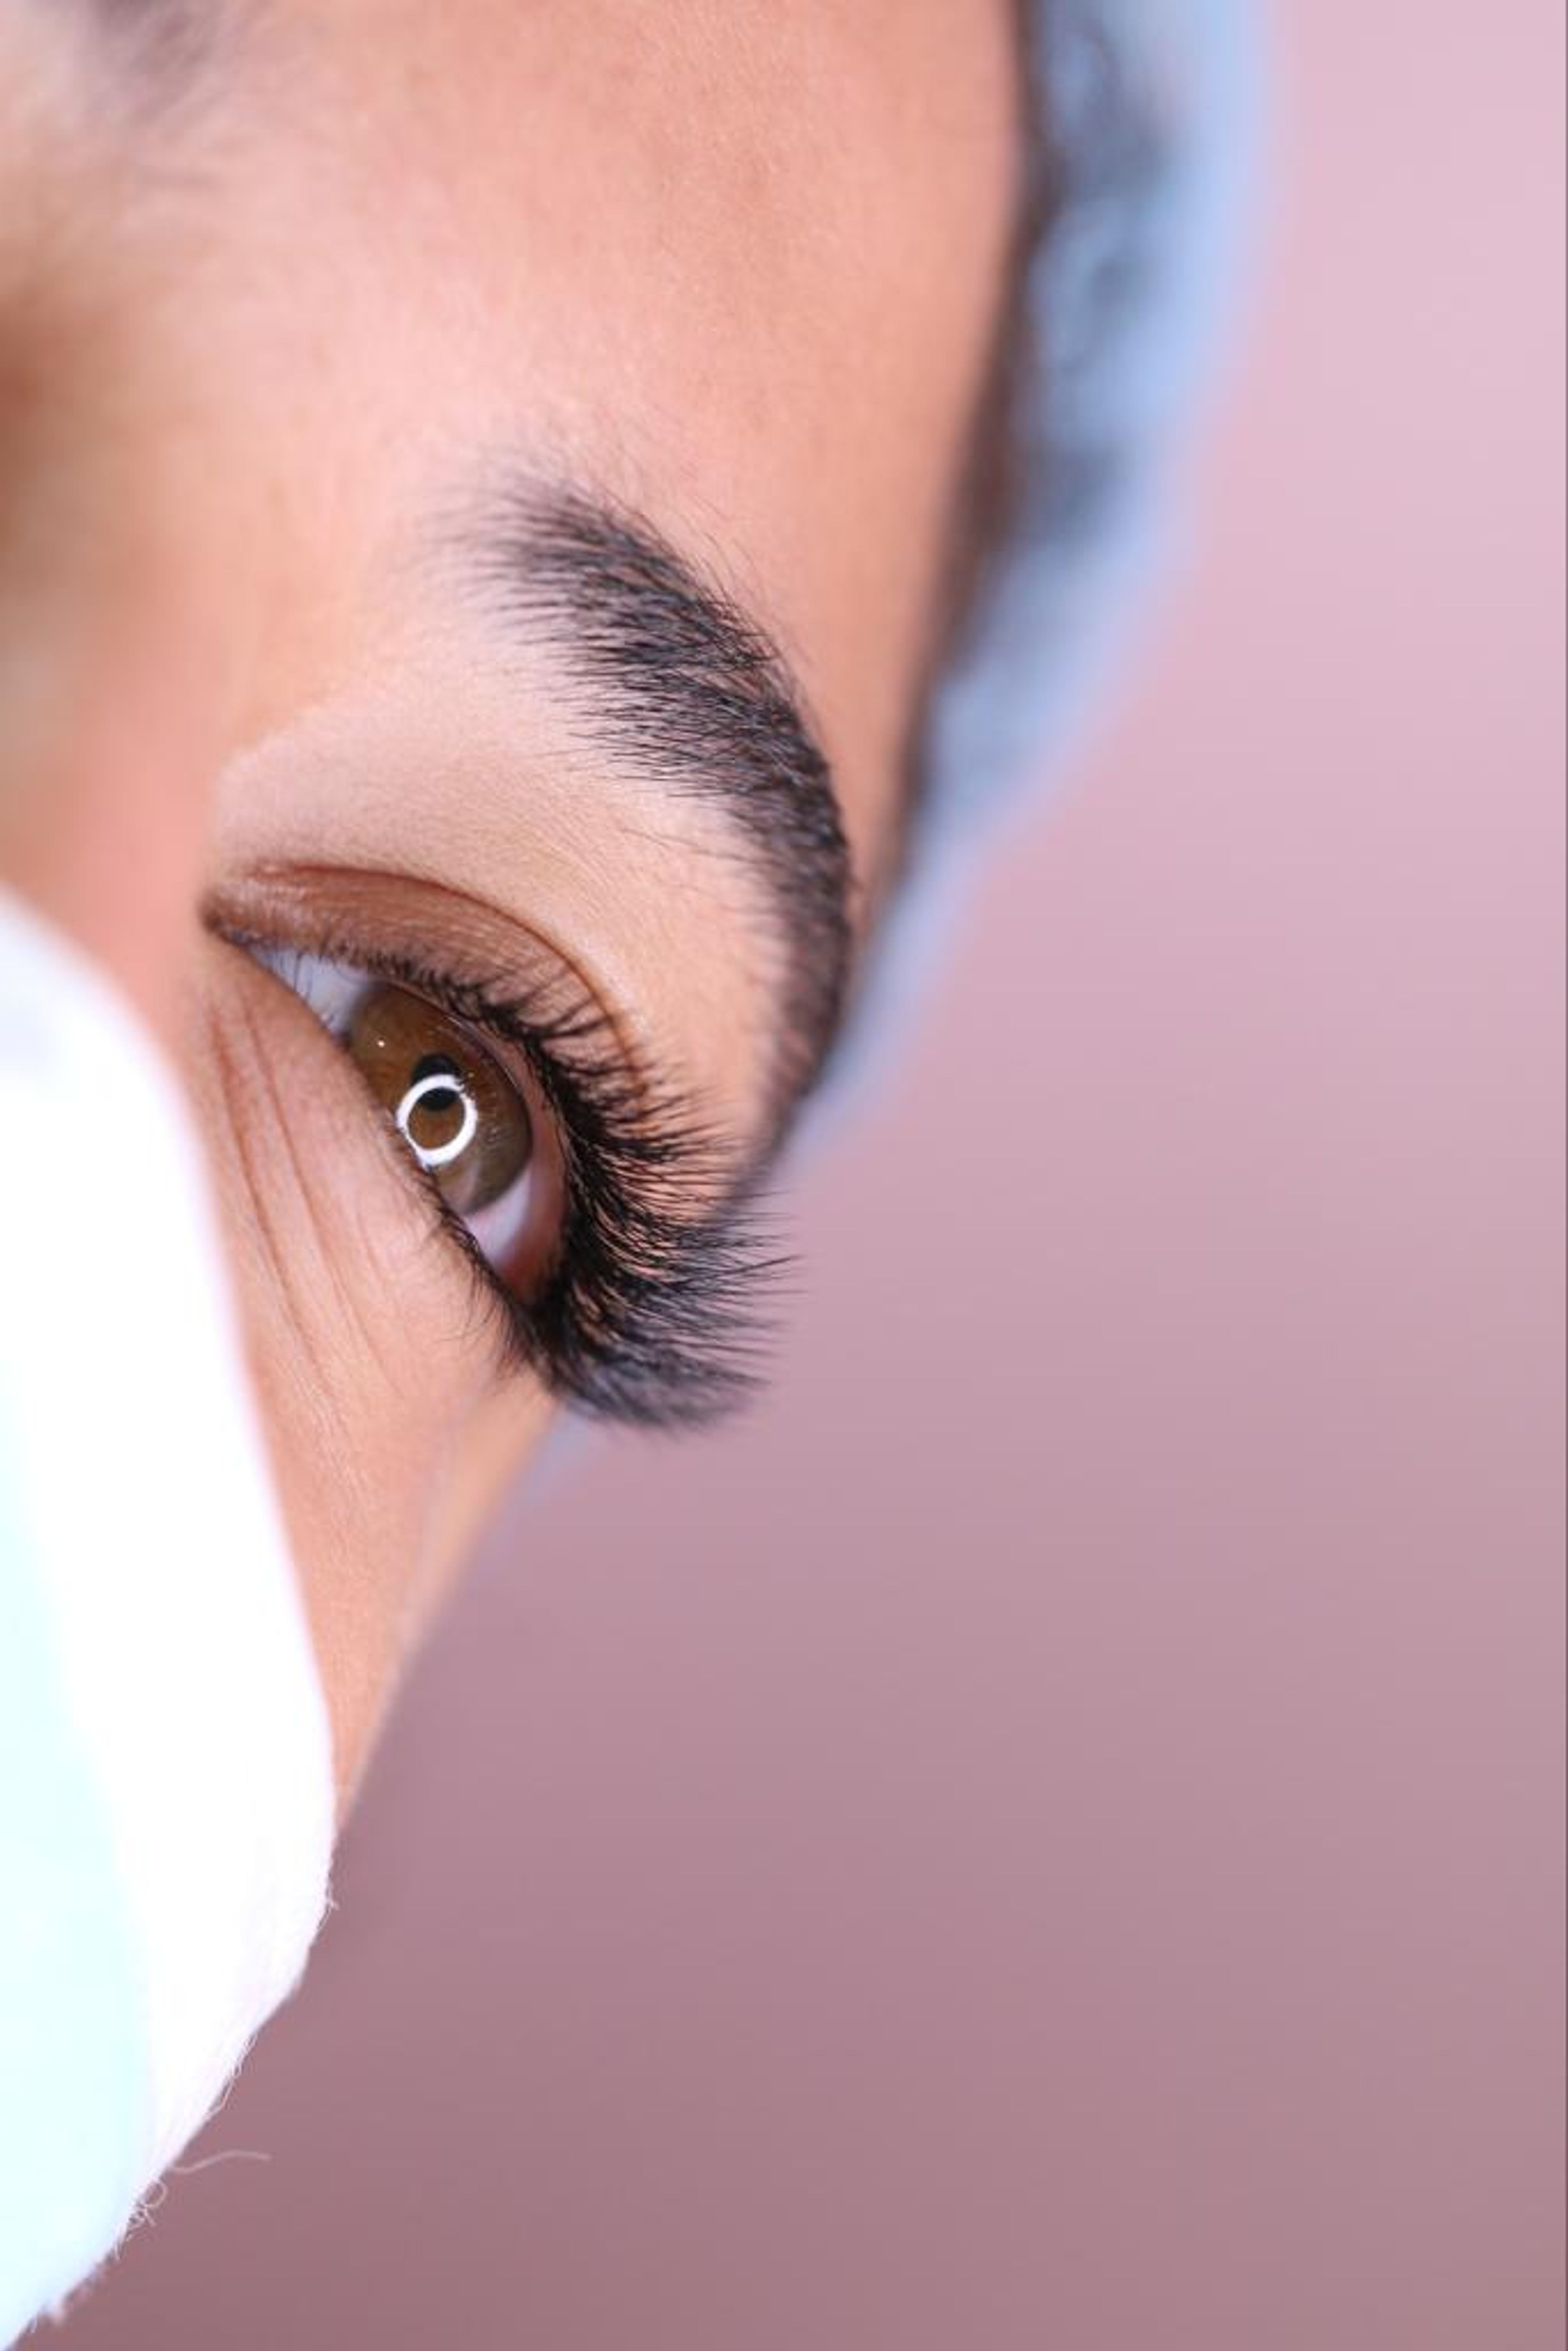 BEGINNER’S GUIDE TO LASH EXTENSIONS